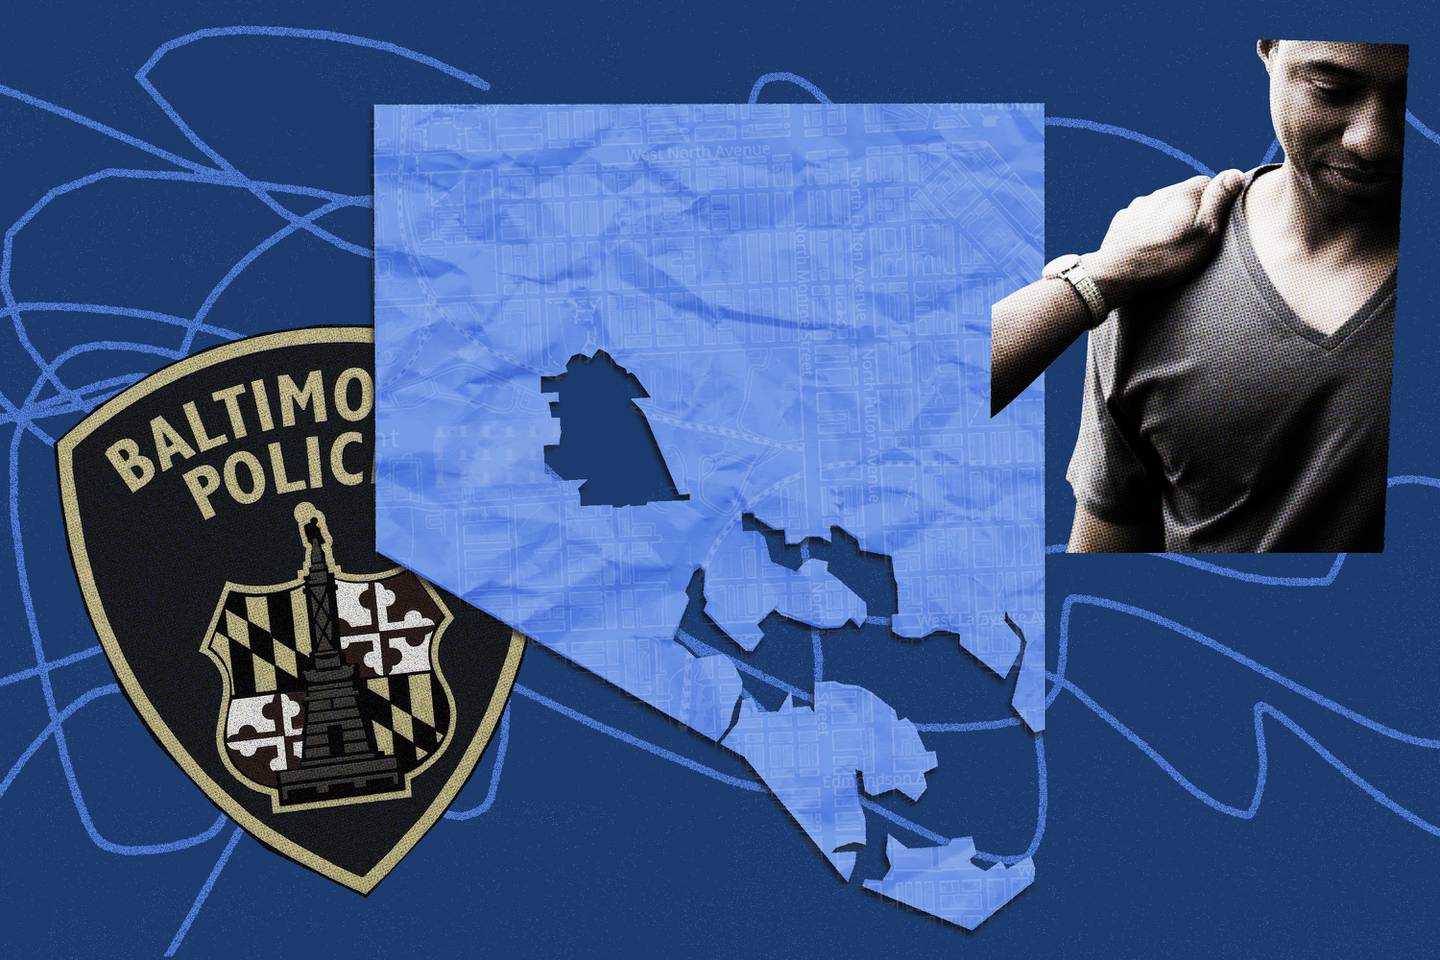 Photo collage showing map of Baltimore City with Western District cut out, Baltimore police badge, and man with another man’s hand on his shoulder.